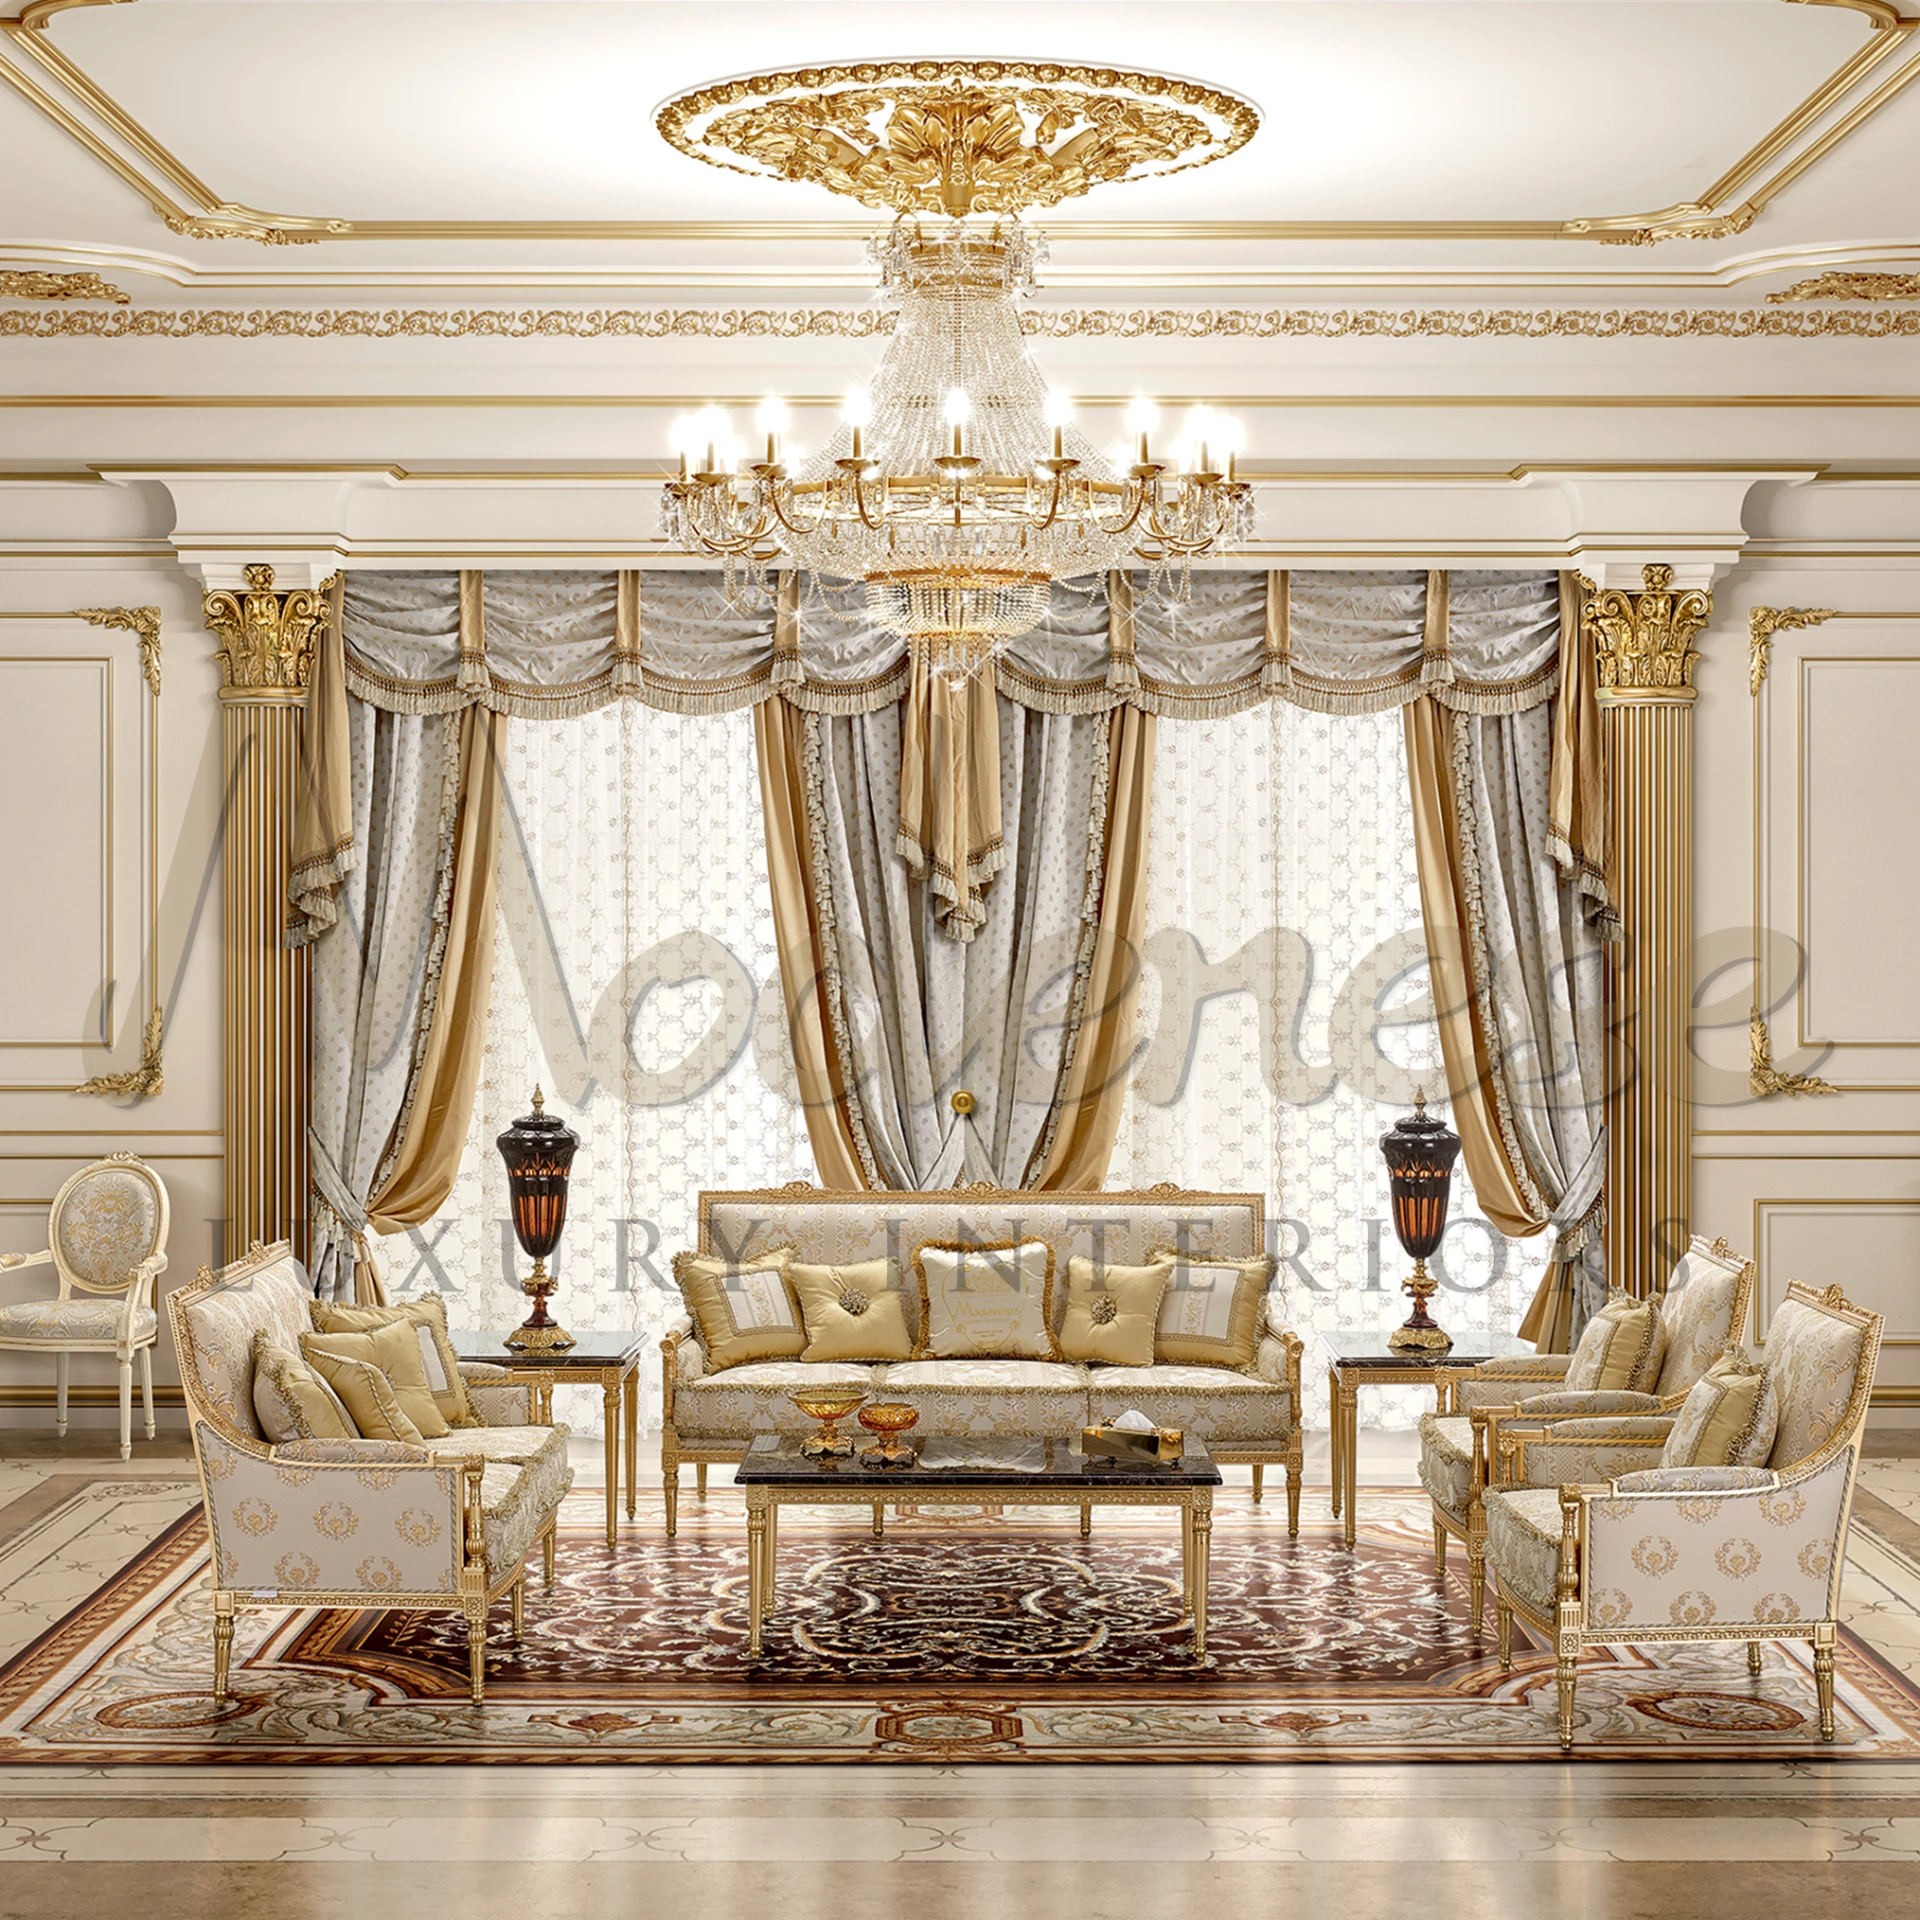 Luxury Victorian Loveseat with gold leaf detailing, blending classic furniture and interior design for sophisticated homes.